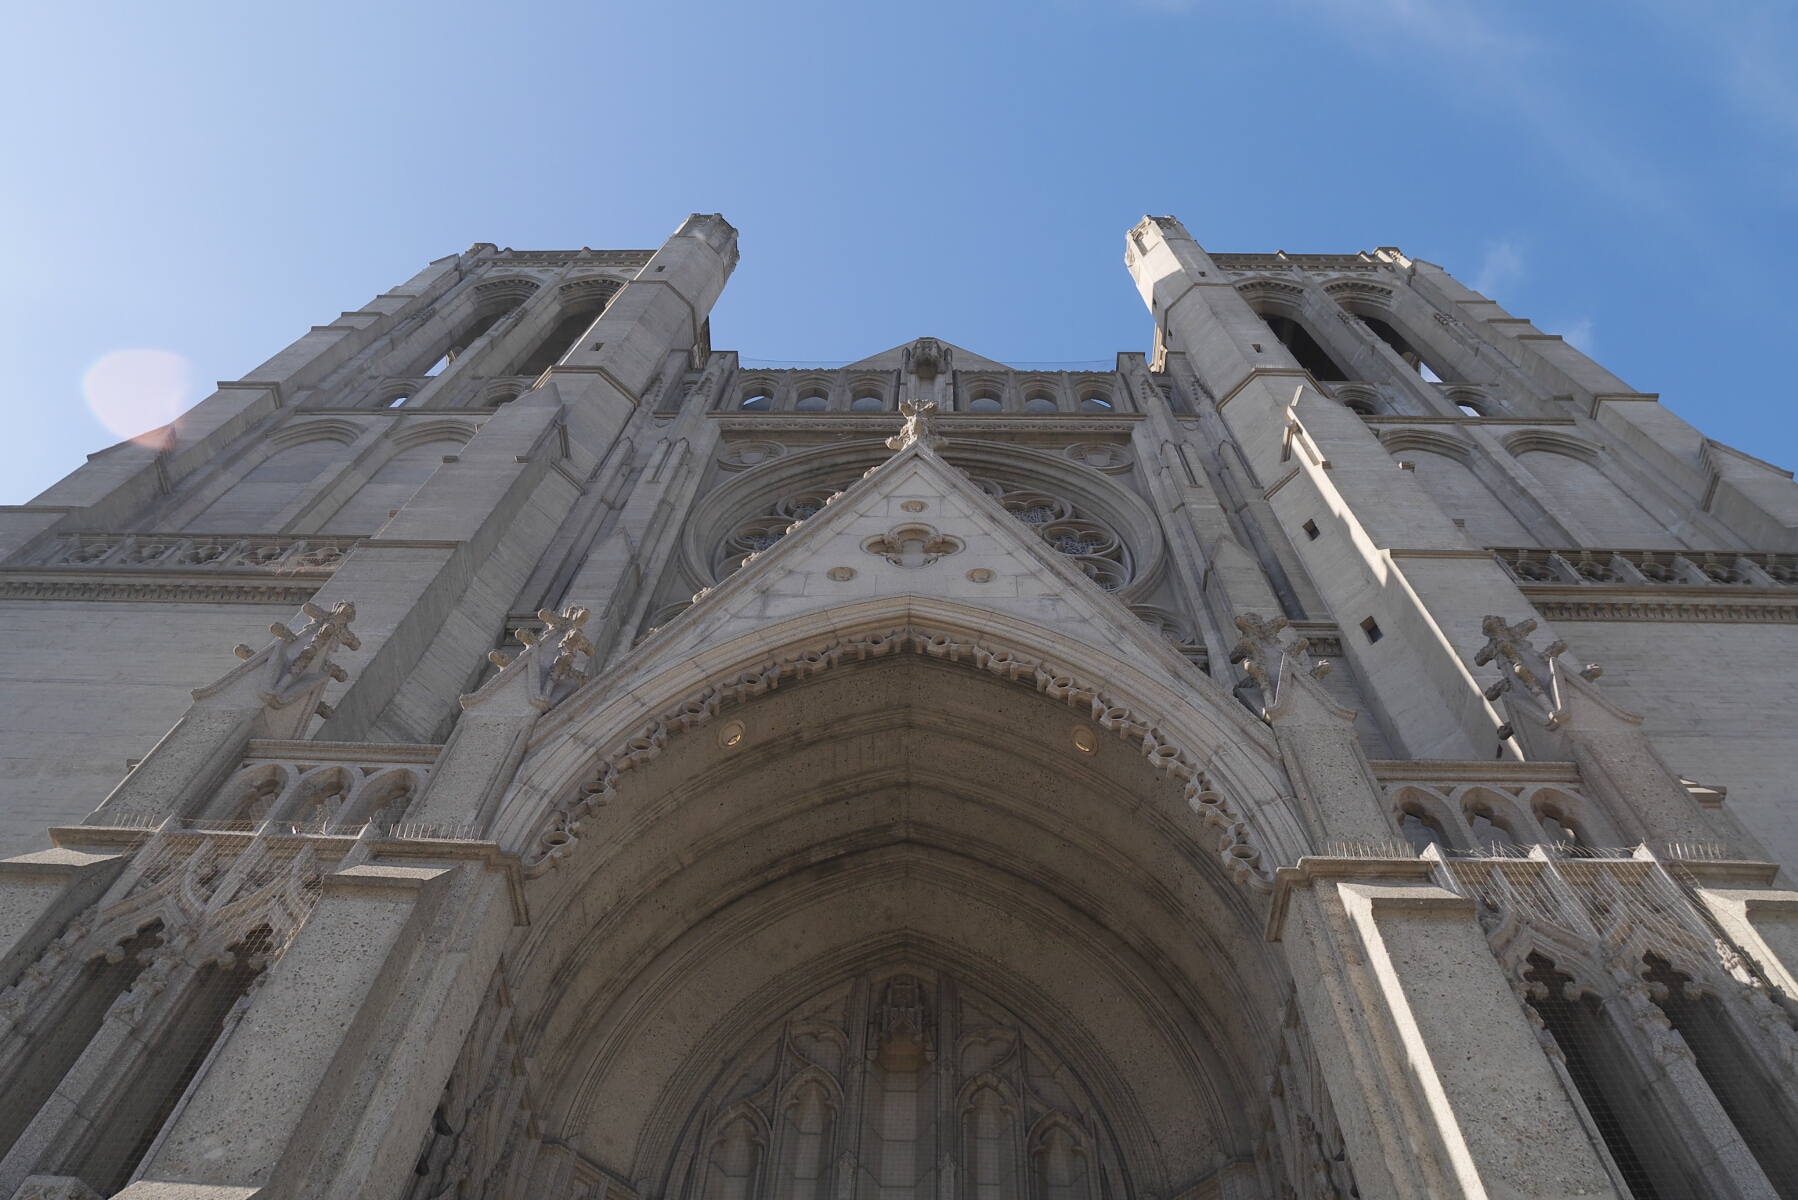 Looking up at the facade of Grace Cathedral.